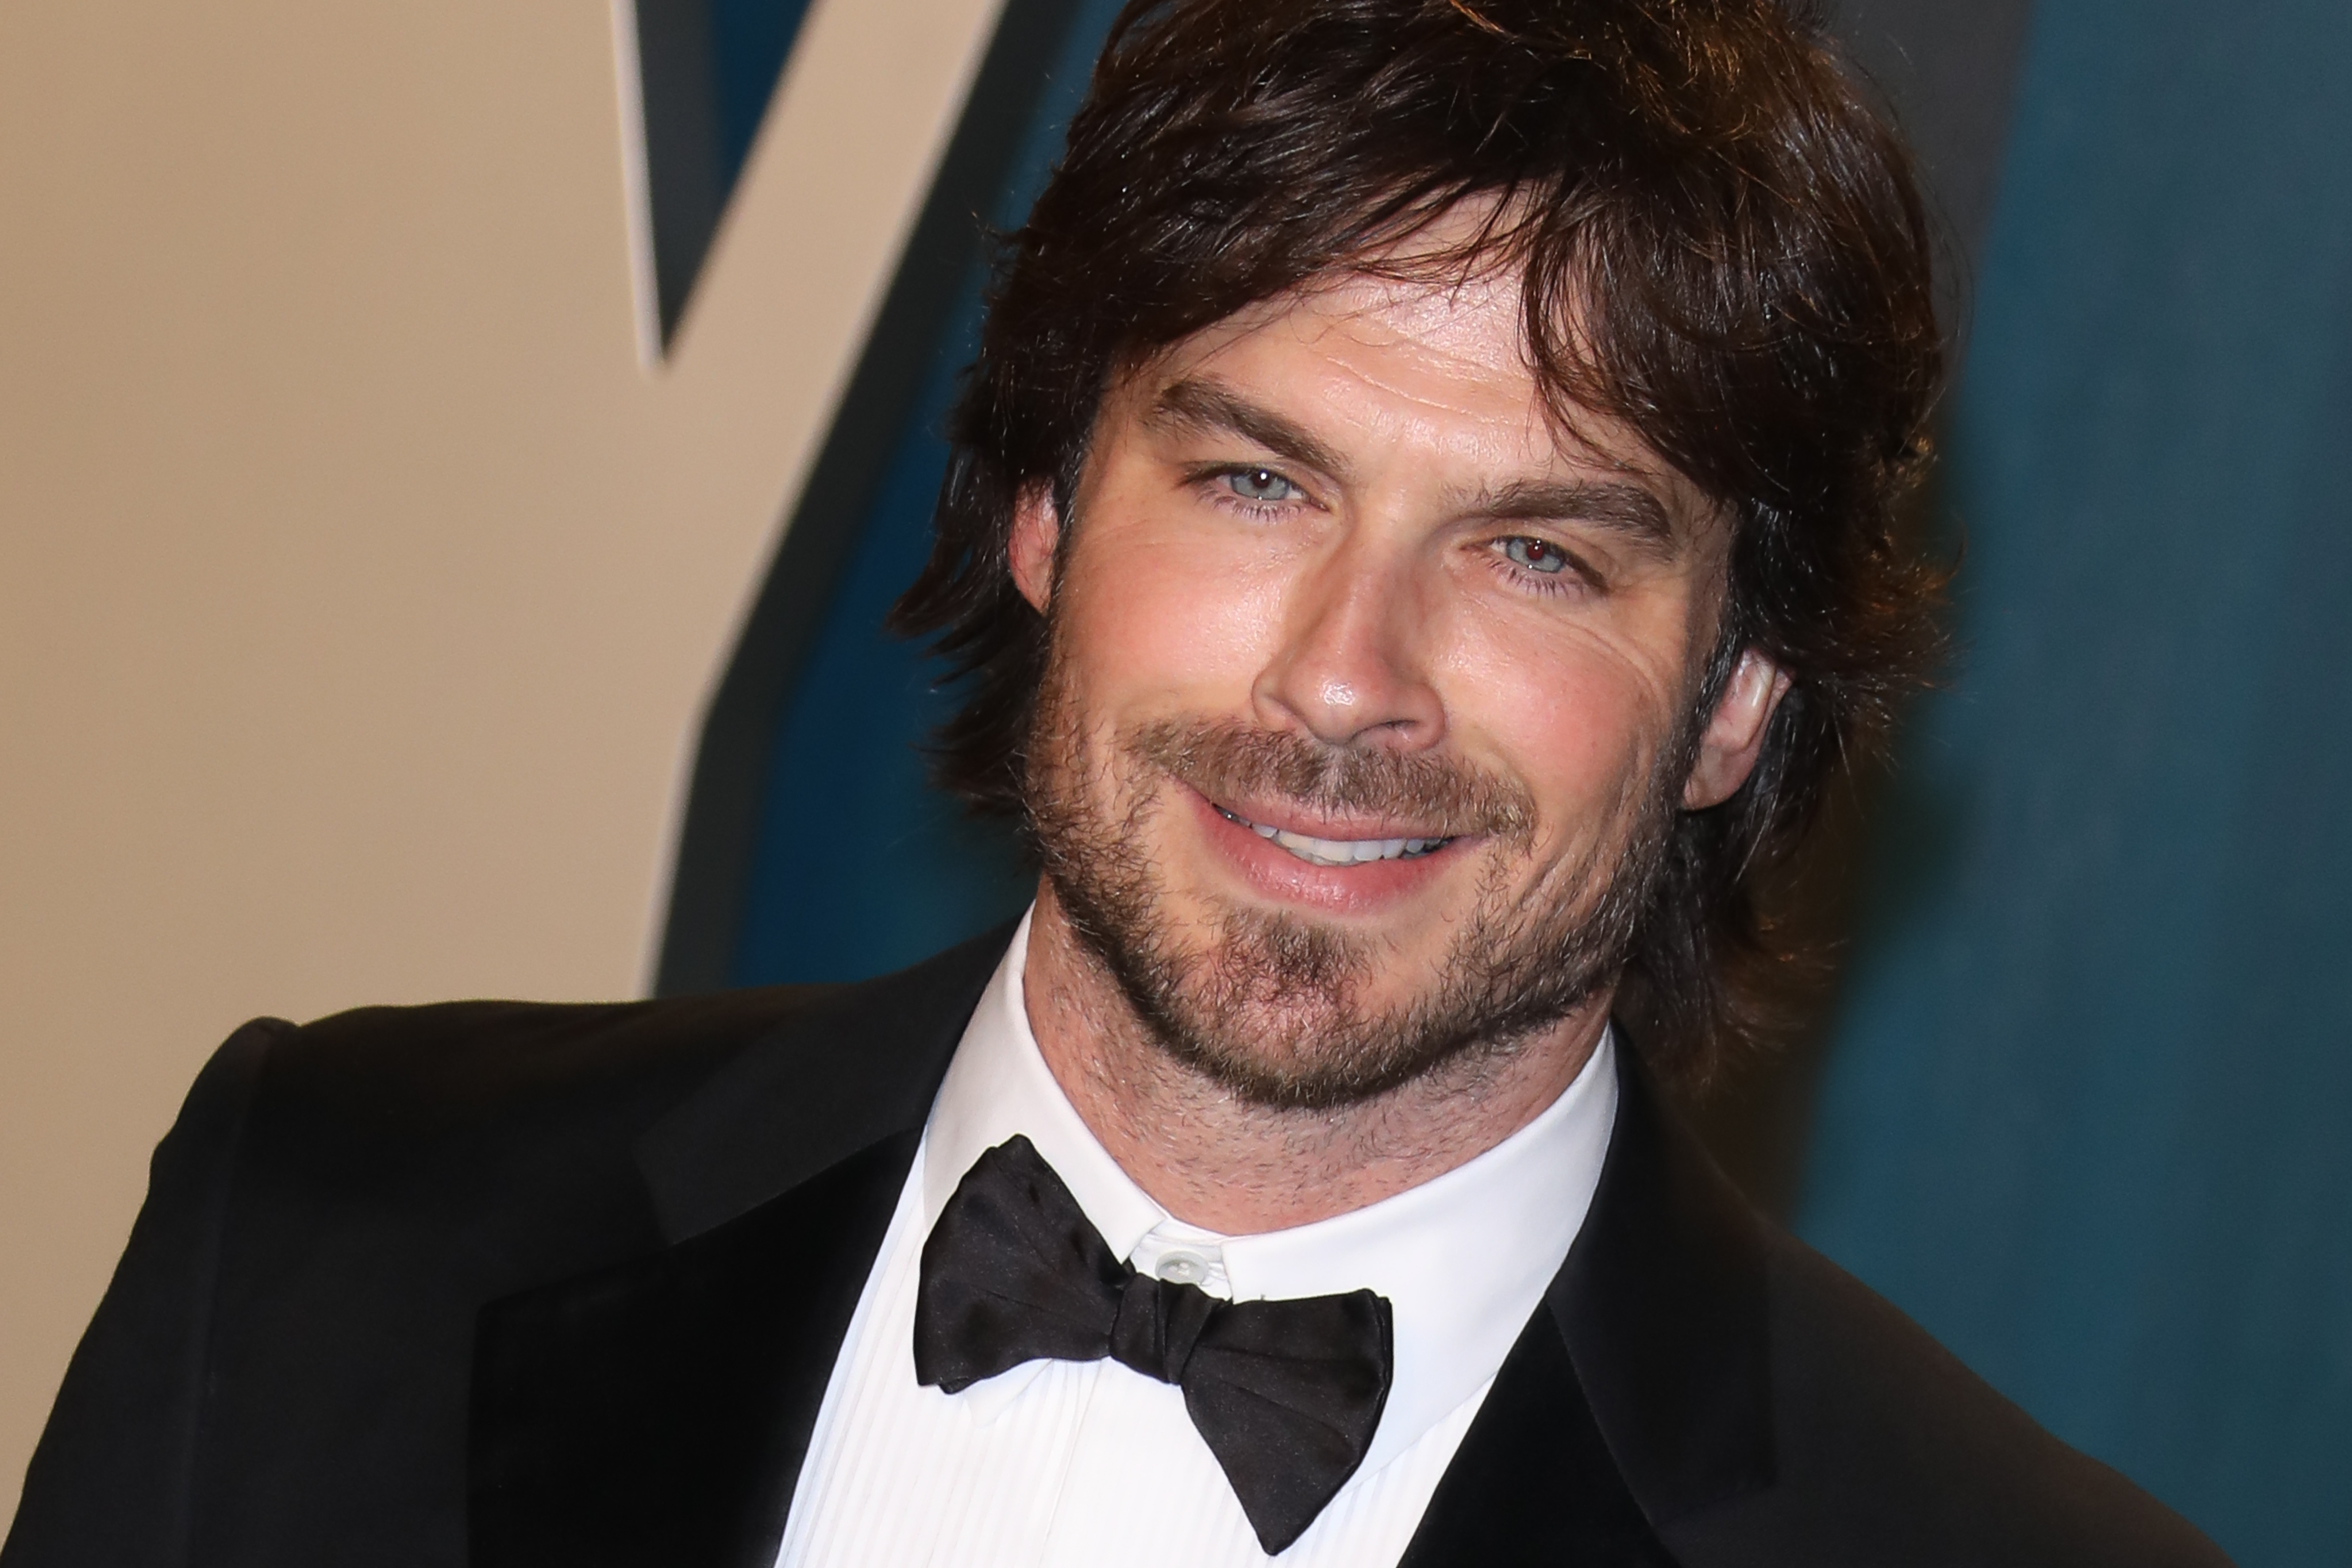 'The Vampire Diaries' star Ian Somerhalder, who auditioned for 'True Blood,' wears a black tux.